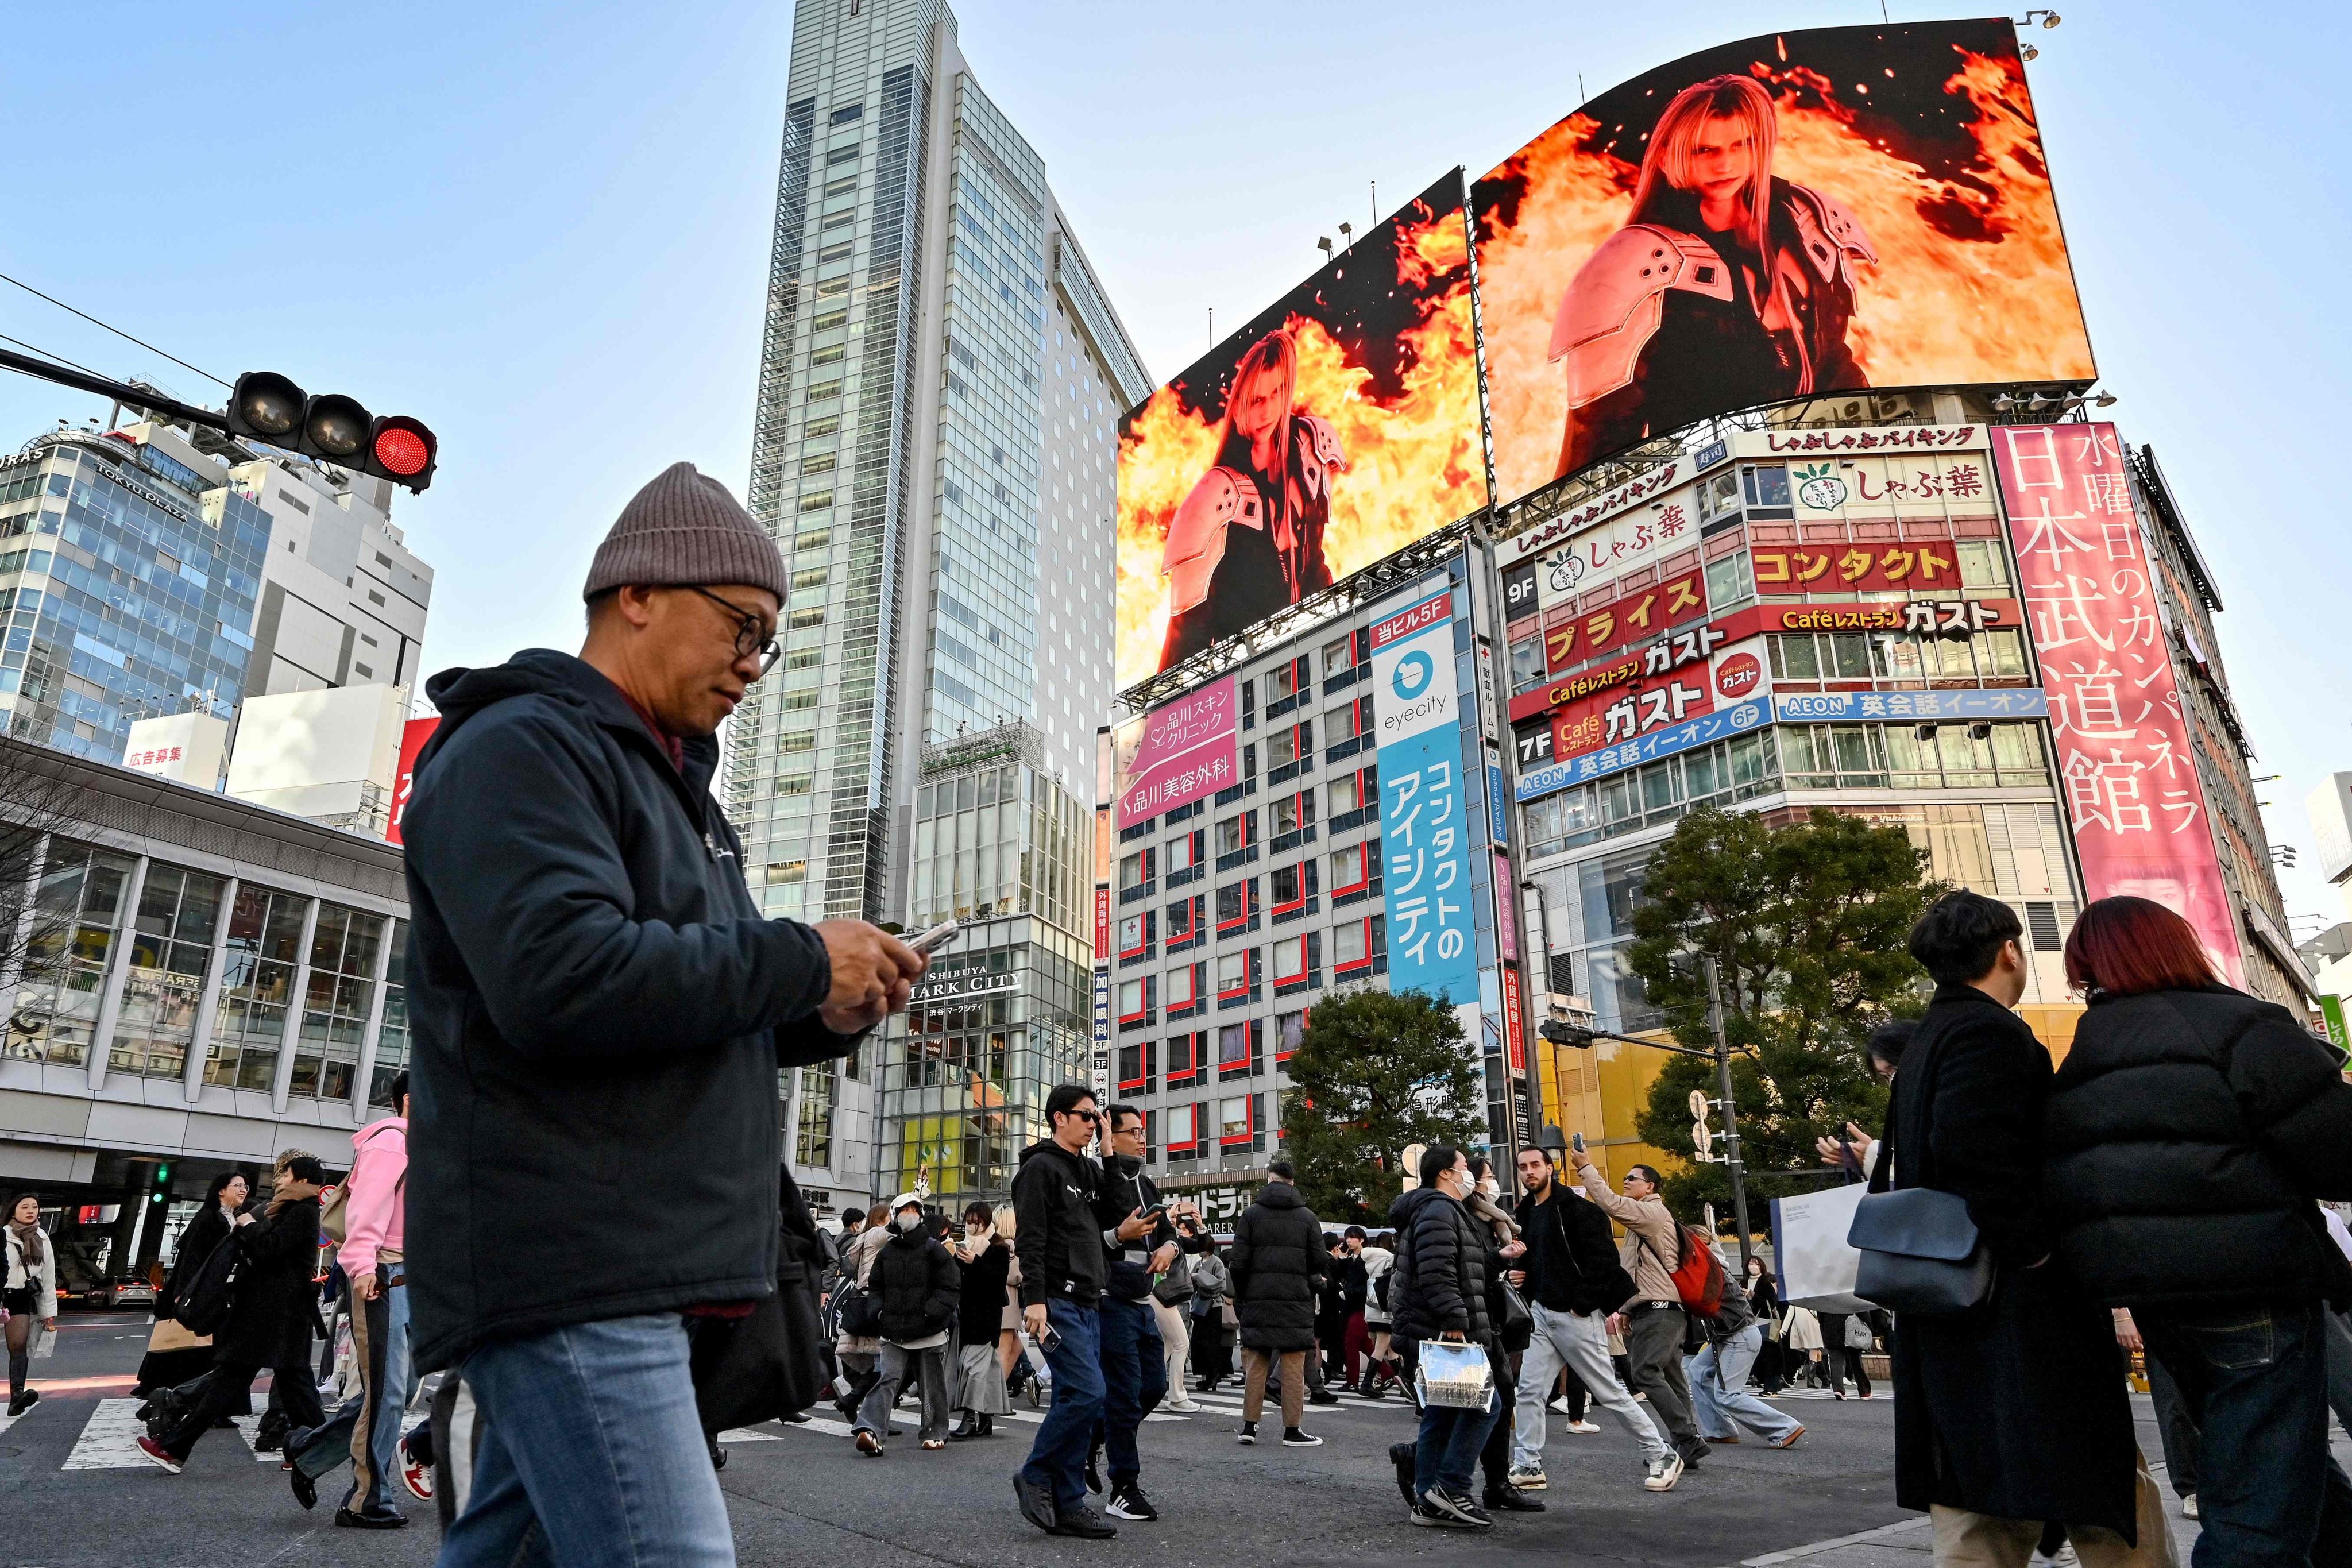 Pedestrians walk across the Shibuya Crossing in Tokyo. Highlighting Japanese culture “fights that negative narrative and undermines the Russian propaganda that suggests Japan is reverting to militarism”, an analyst says. Photo: AFP